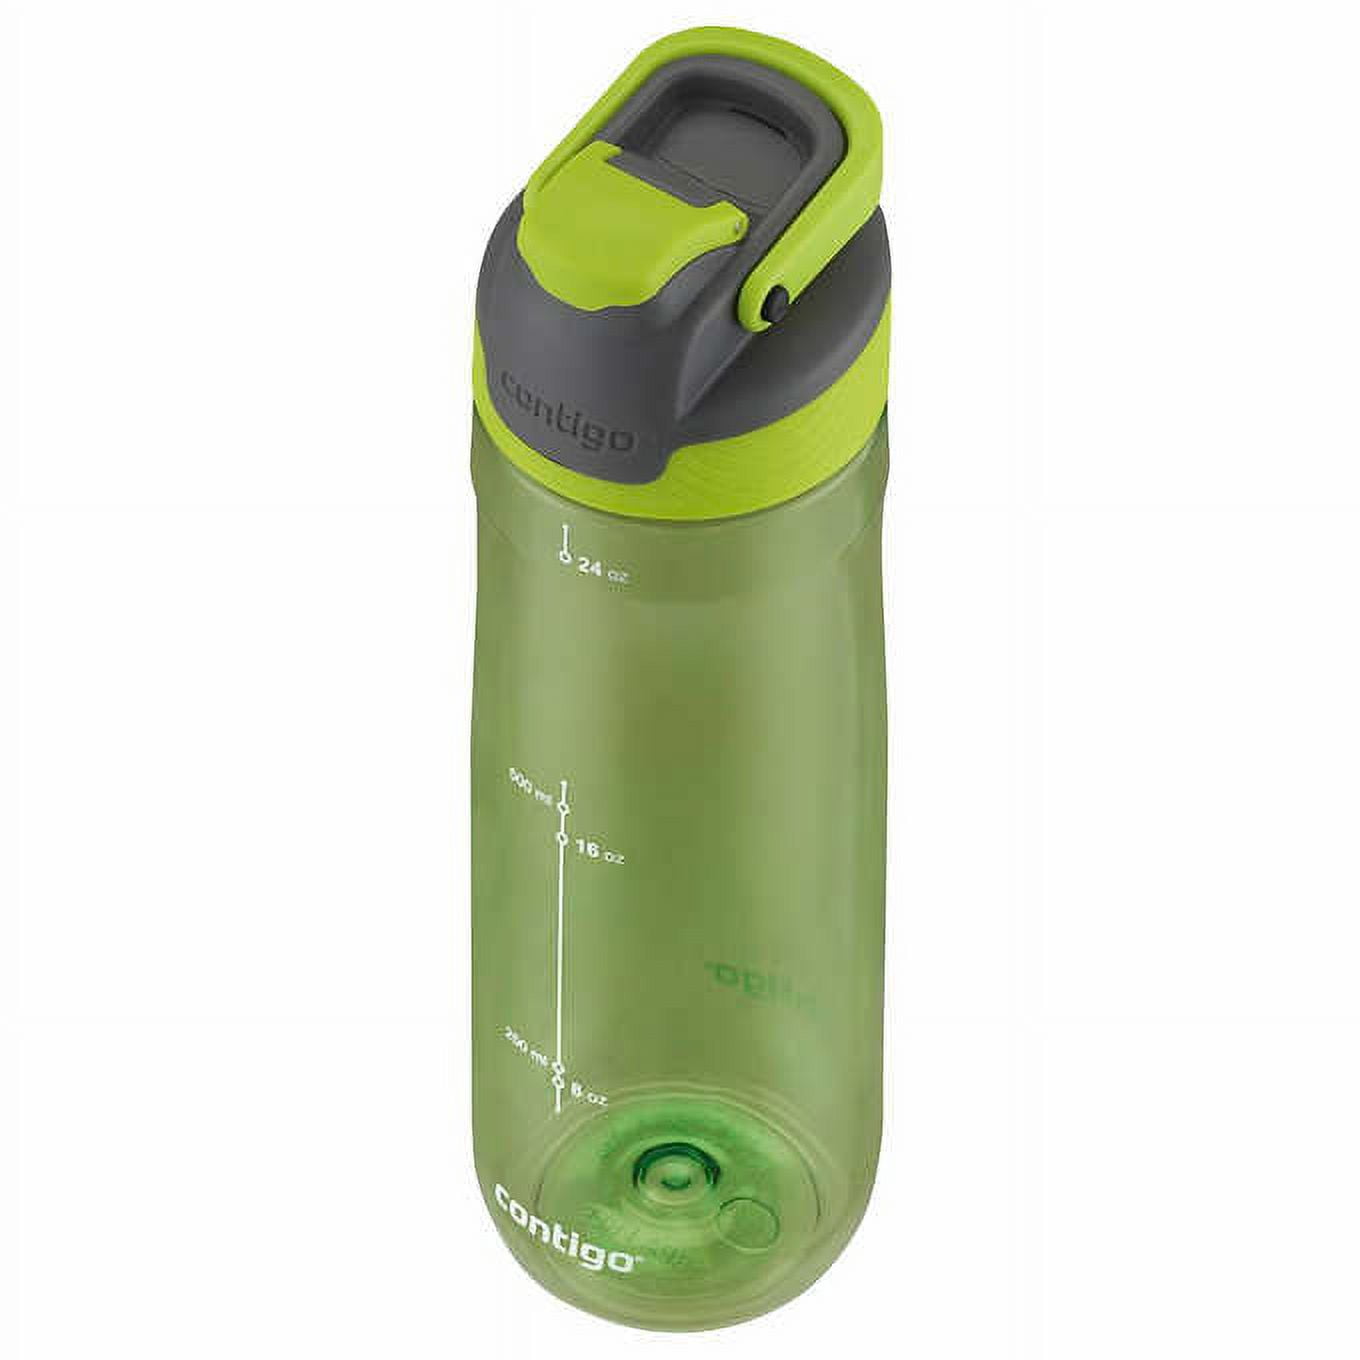 Contigo 24 Ounce Grace Water Bottle with Spill Proof Auto Seal Lid